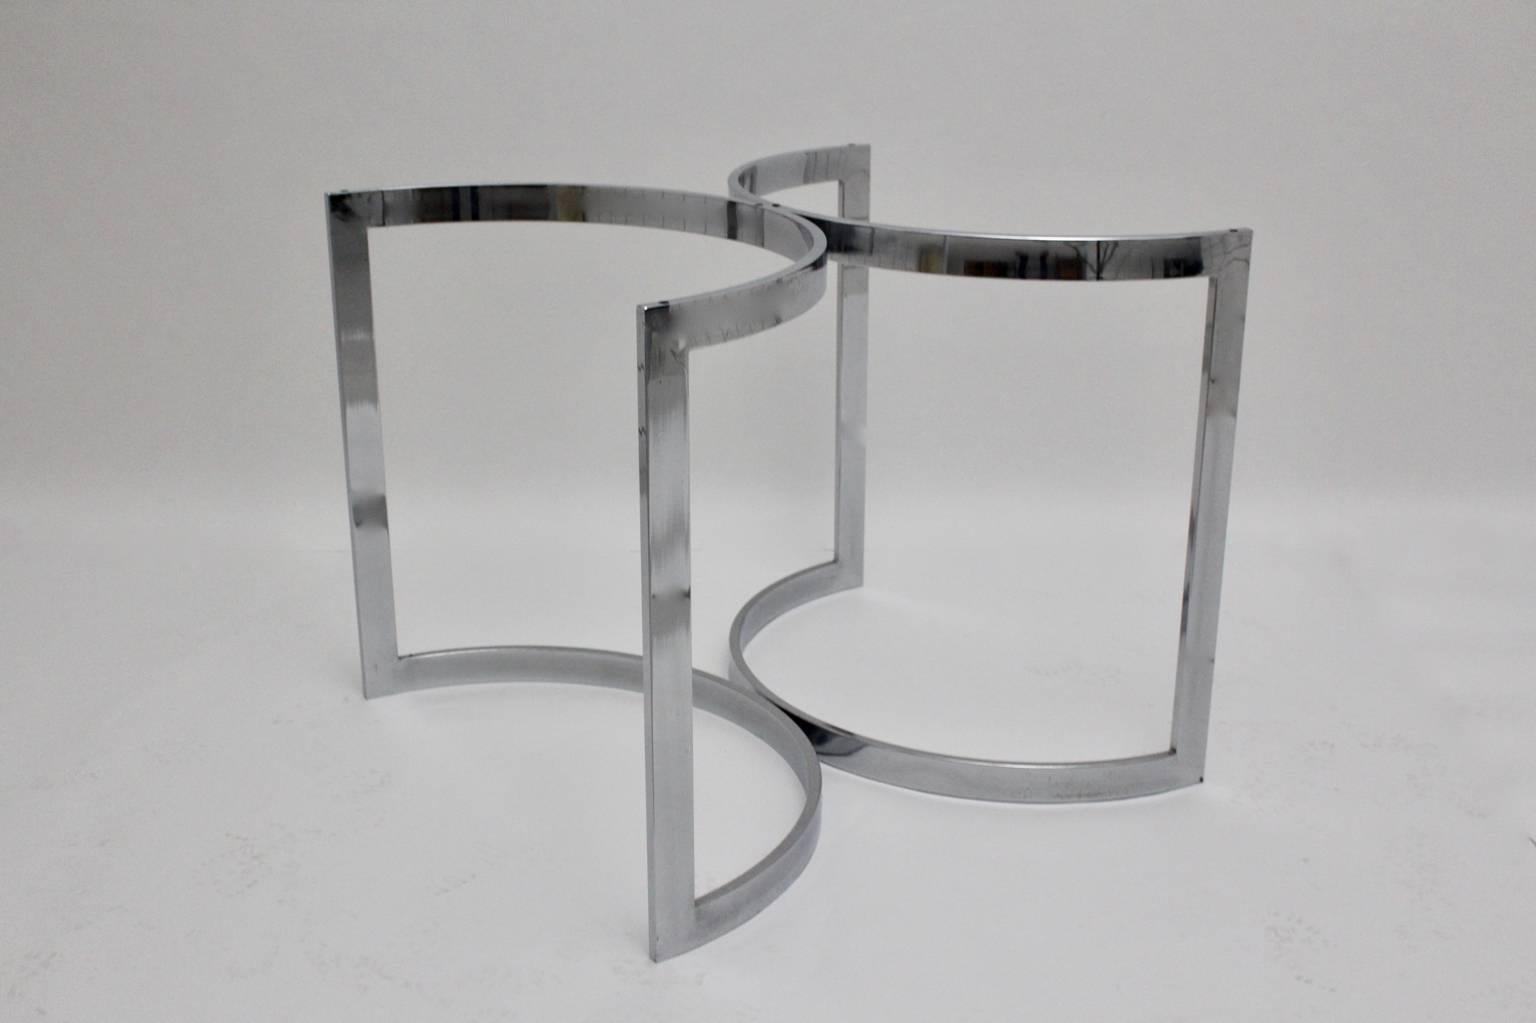 Late 20th Century Mid Century Modern Vintage Chrome Glass Dining Room Table, 1970, United Kingdom For Sale